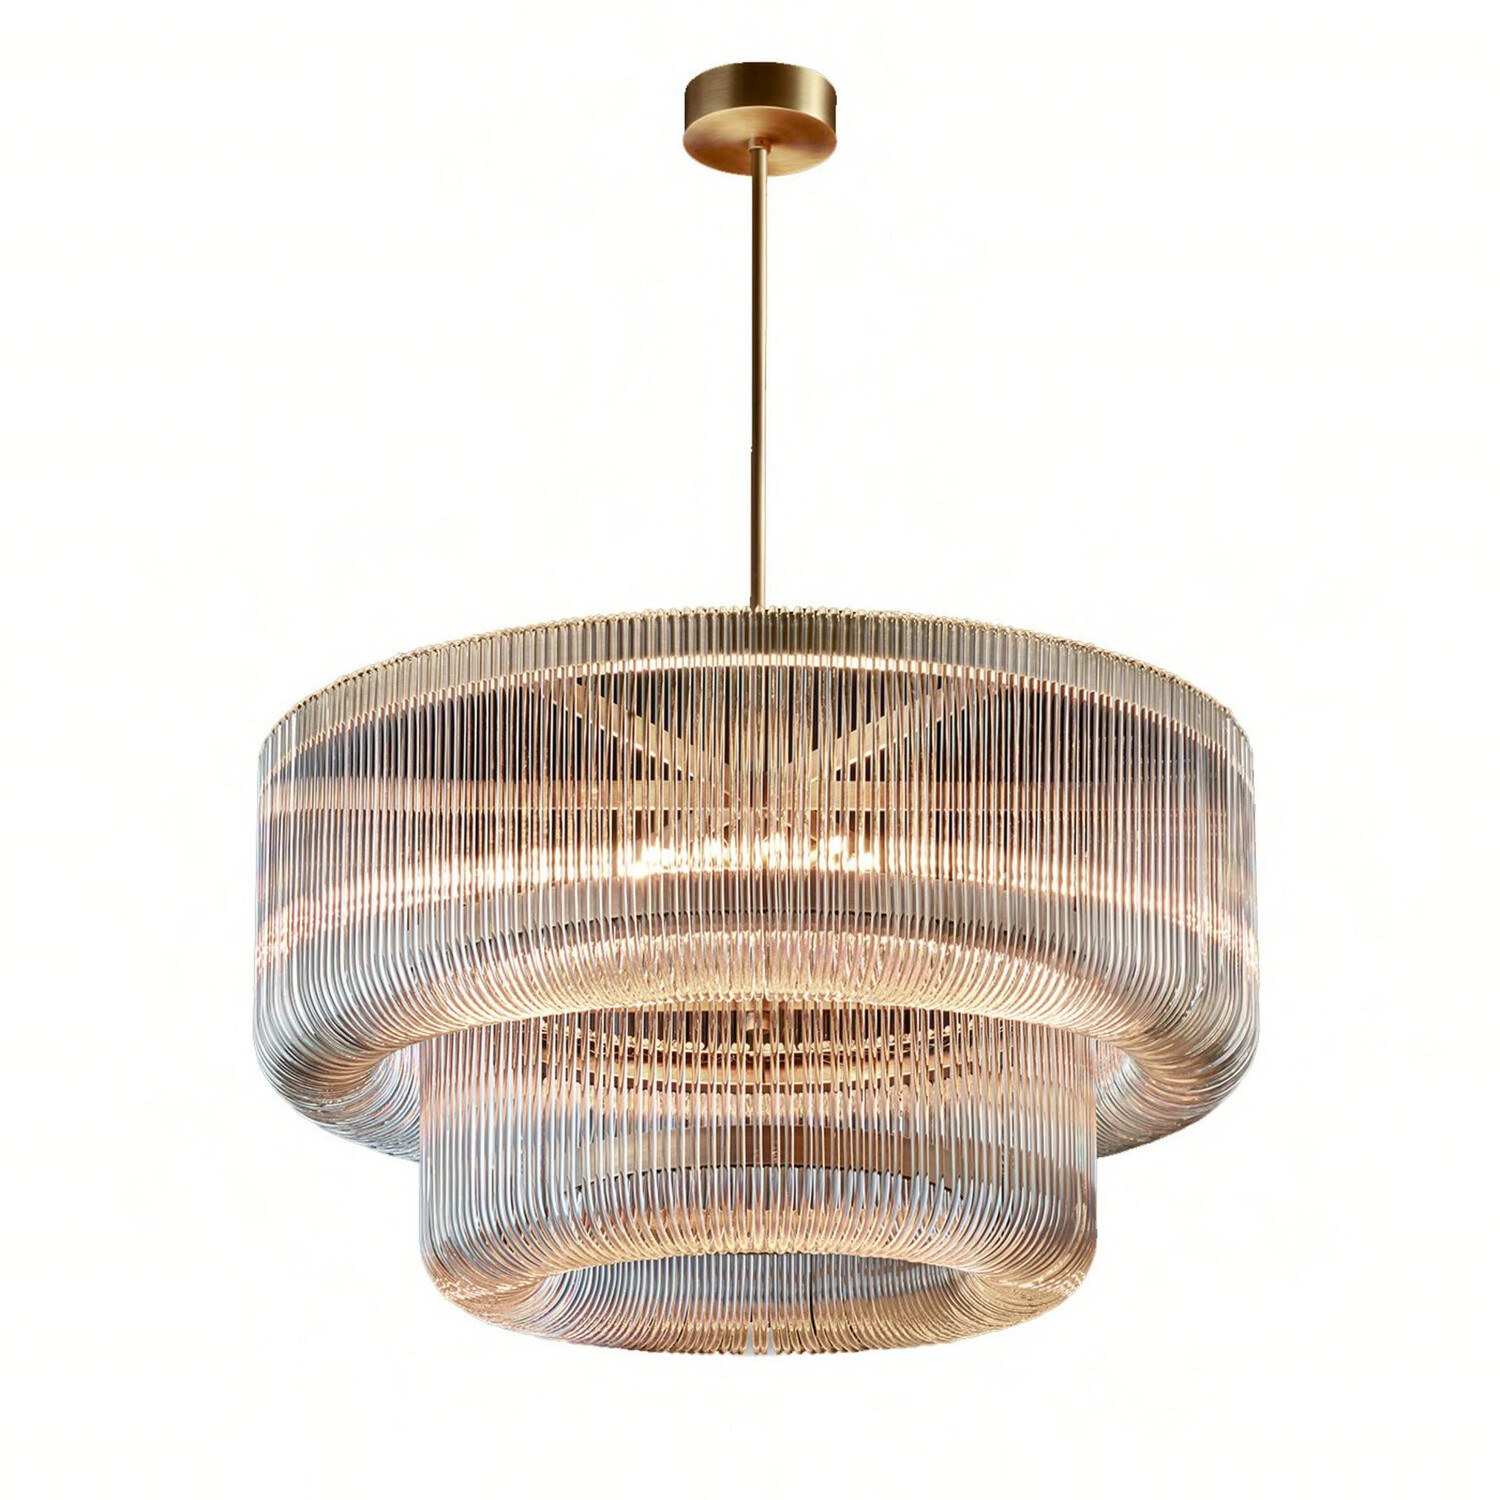 Luxury Bovola chandelier with hand-made clear glass rods